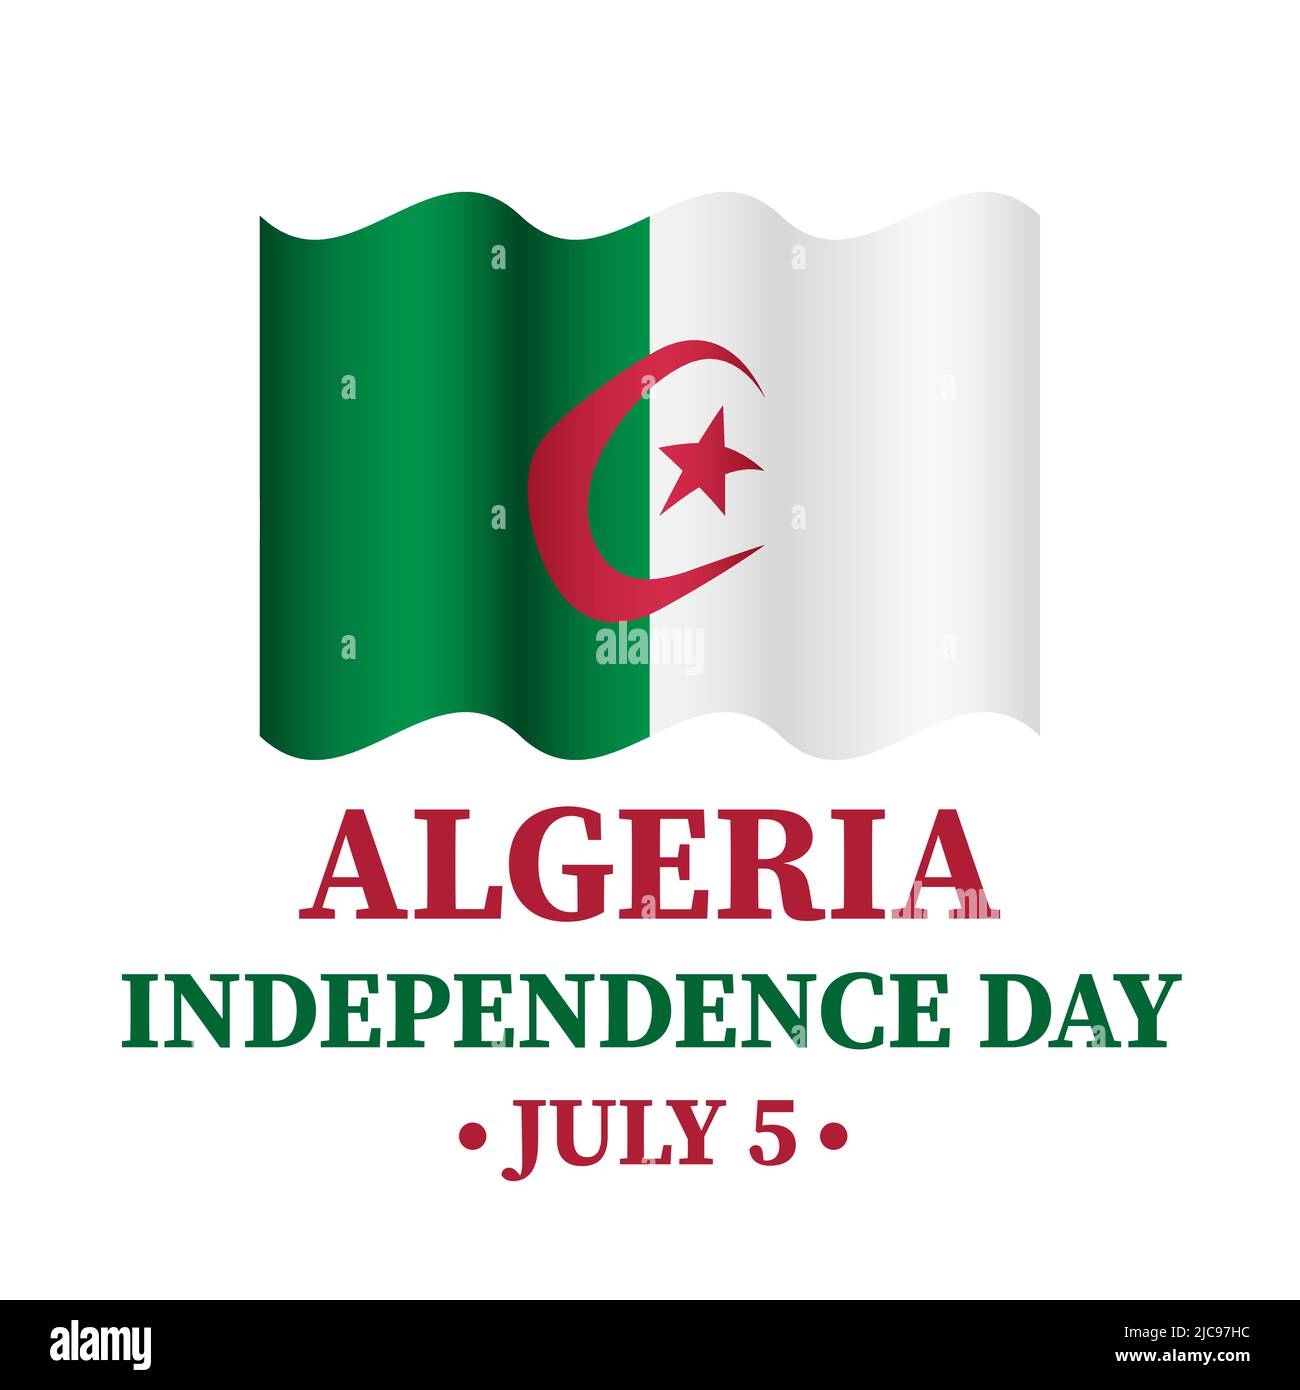 Algeria Independence Day typography poster. National holiday celebrate on July 5. Vector template for banner, flyer, sticker, greeting card, postcard, Stock Vector